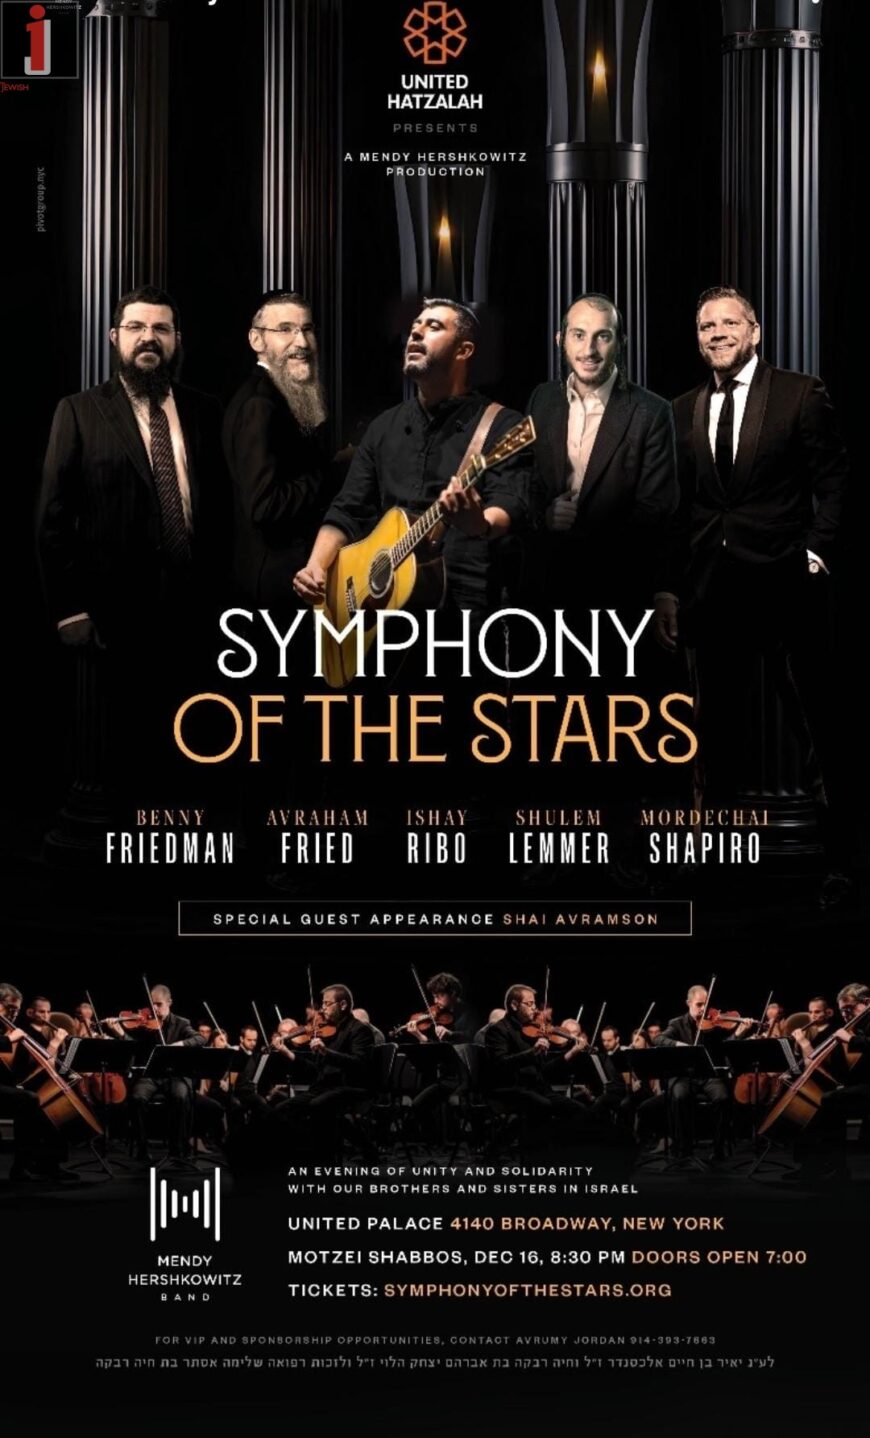 SYMPHONY OF THE STARS CONCERT